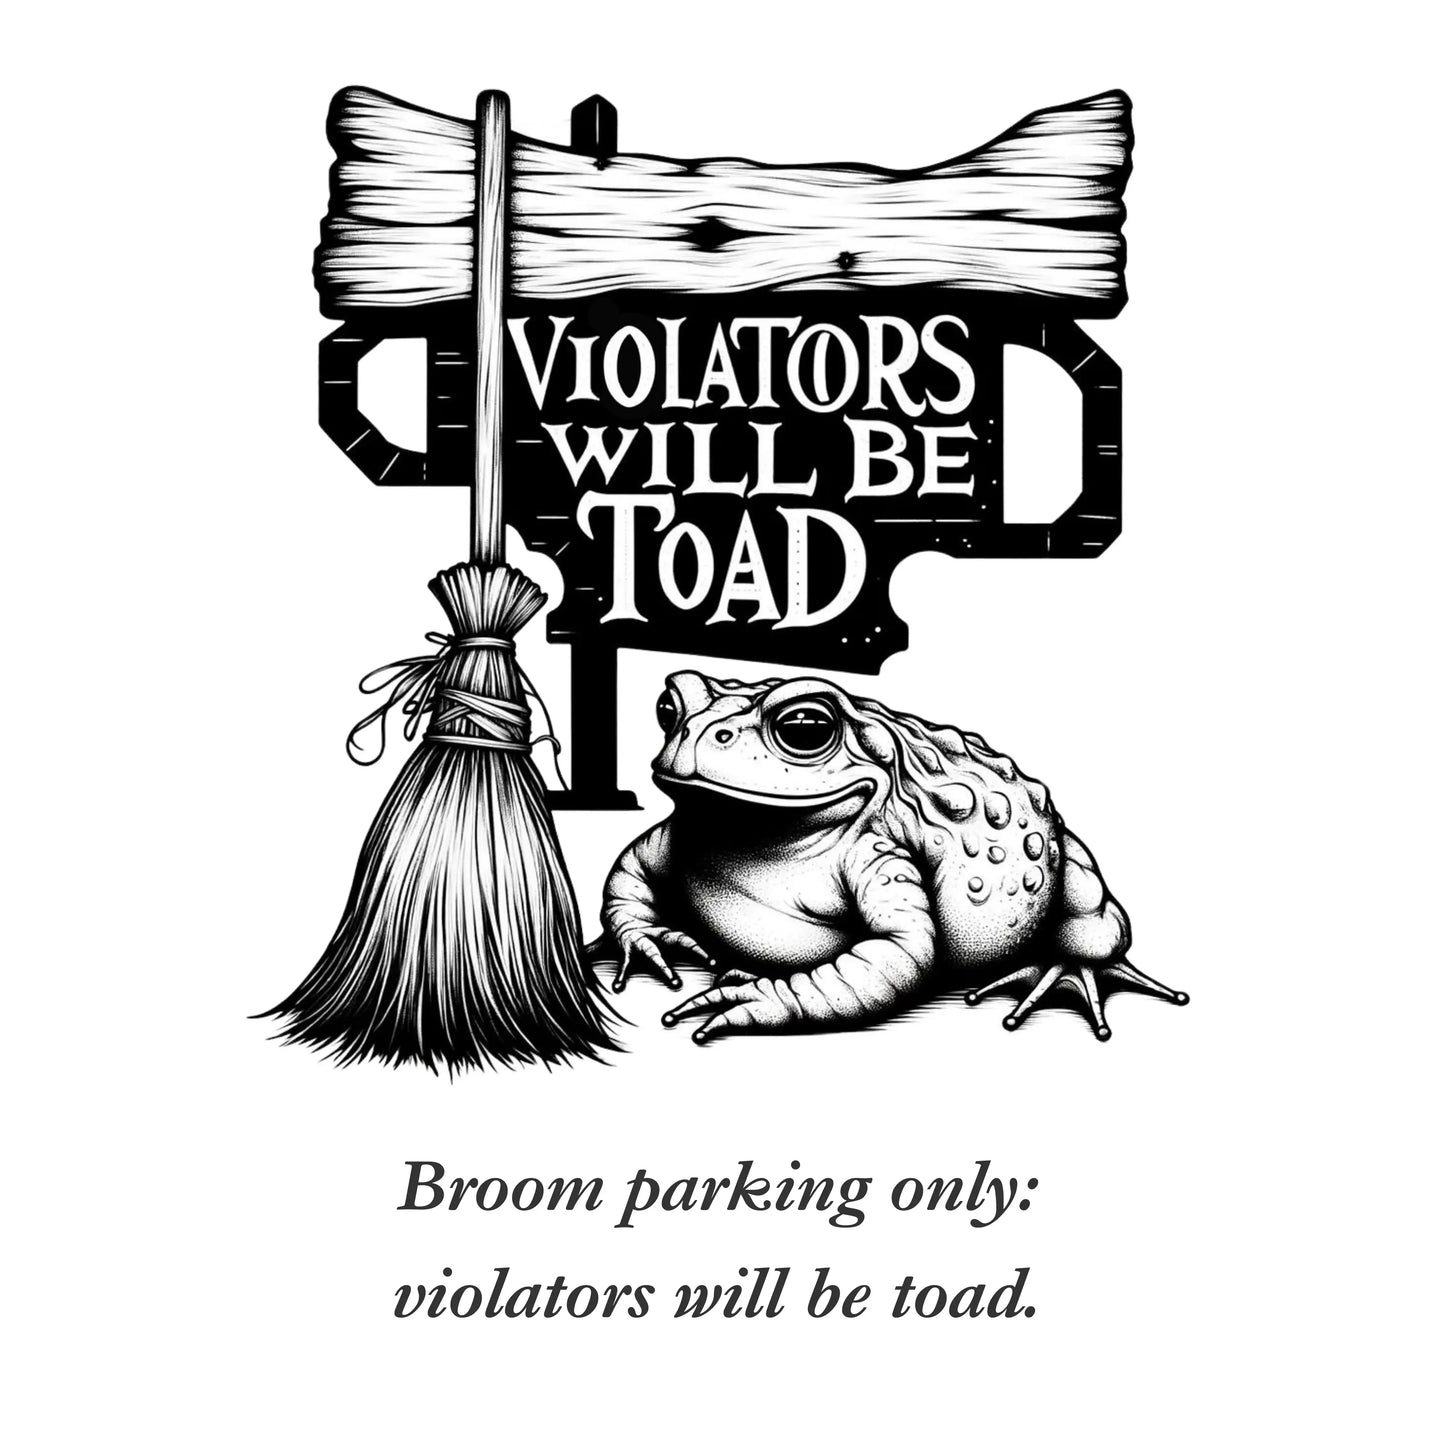 Broom parking only violators will be toad graphic design from blk moon shop.